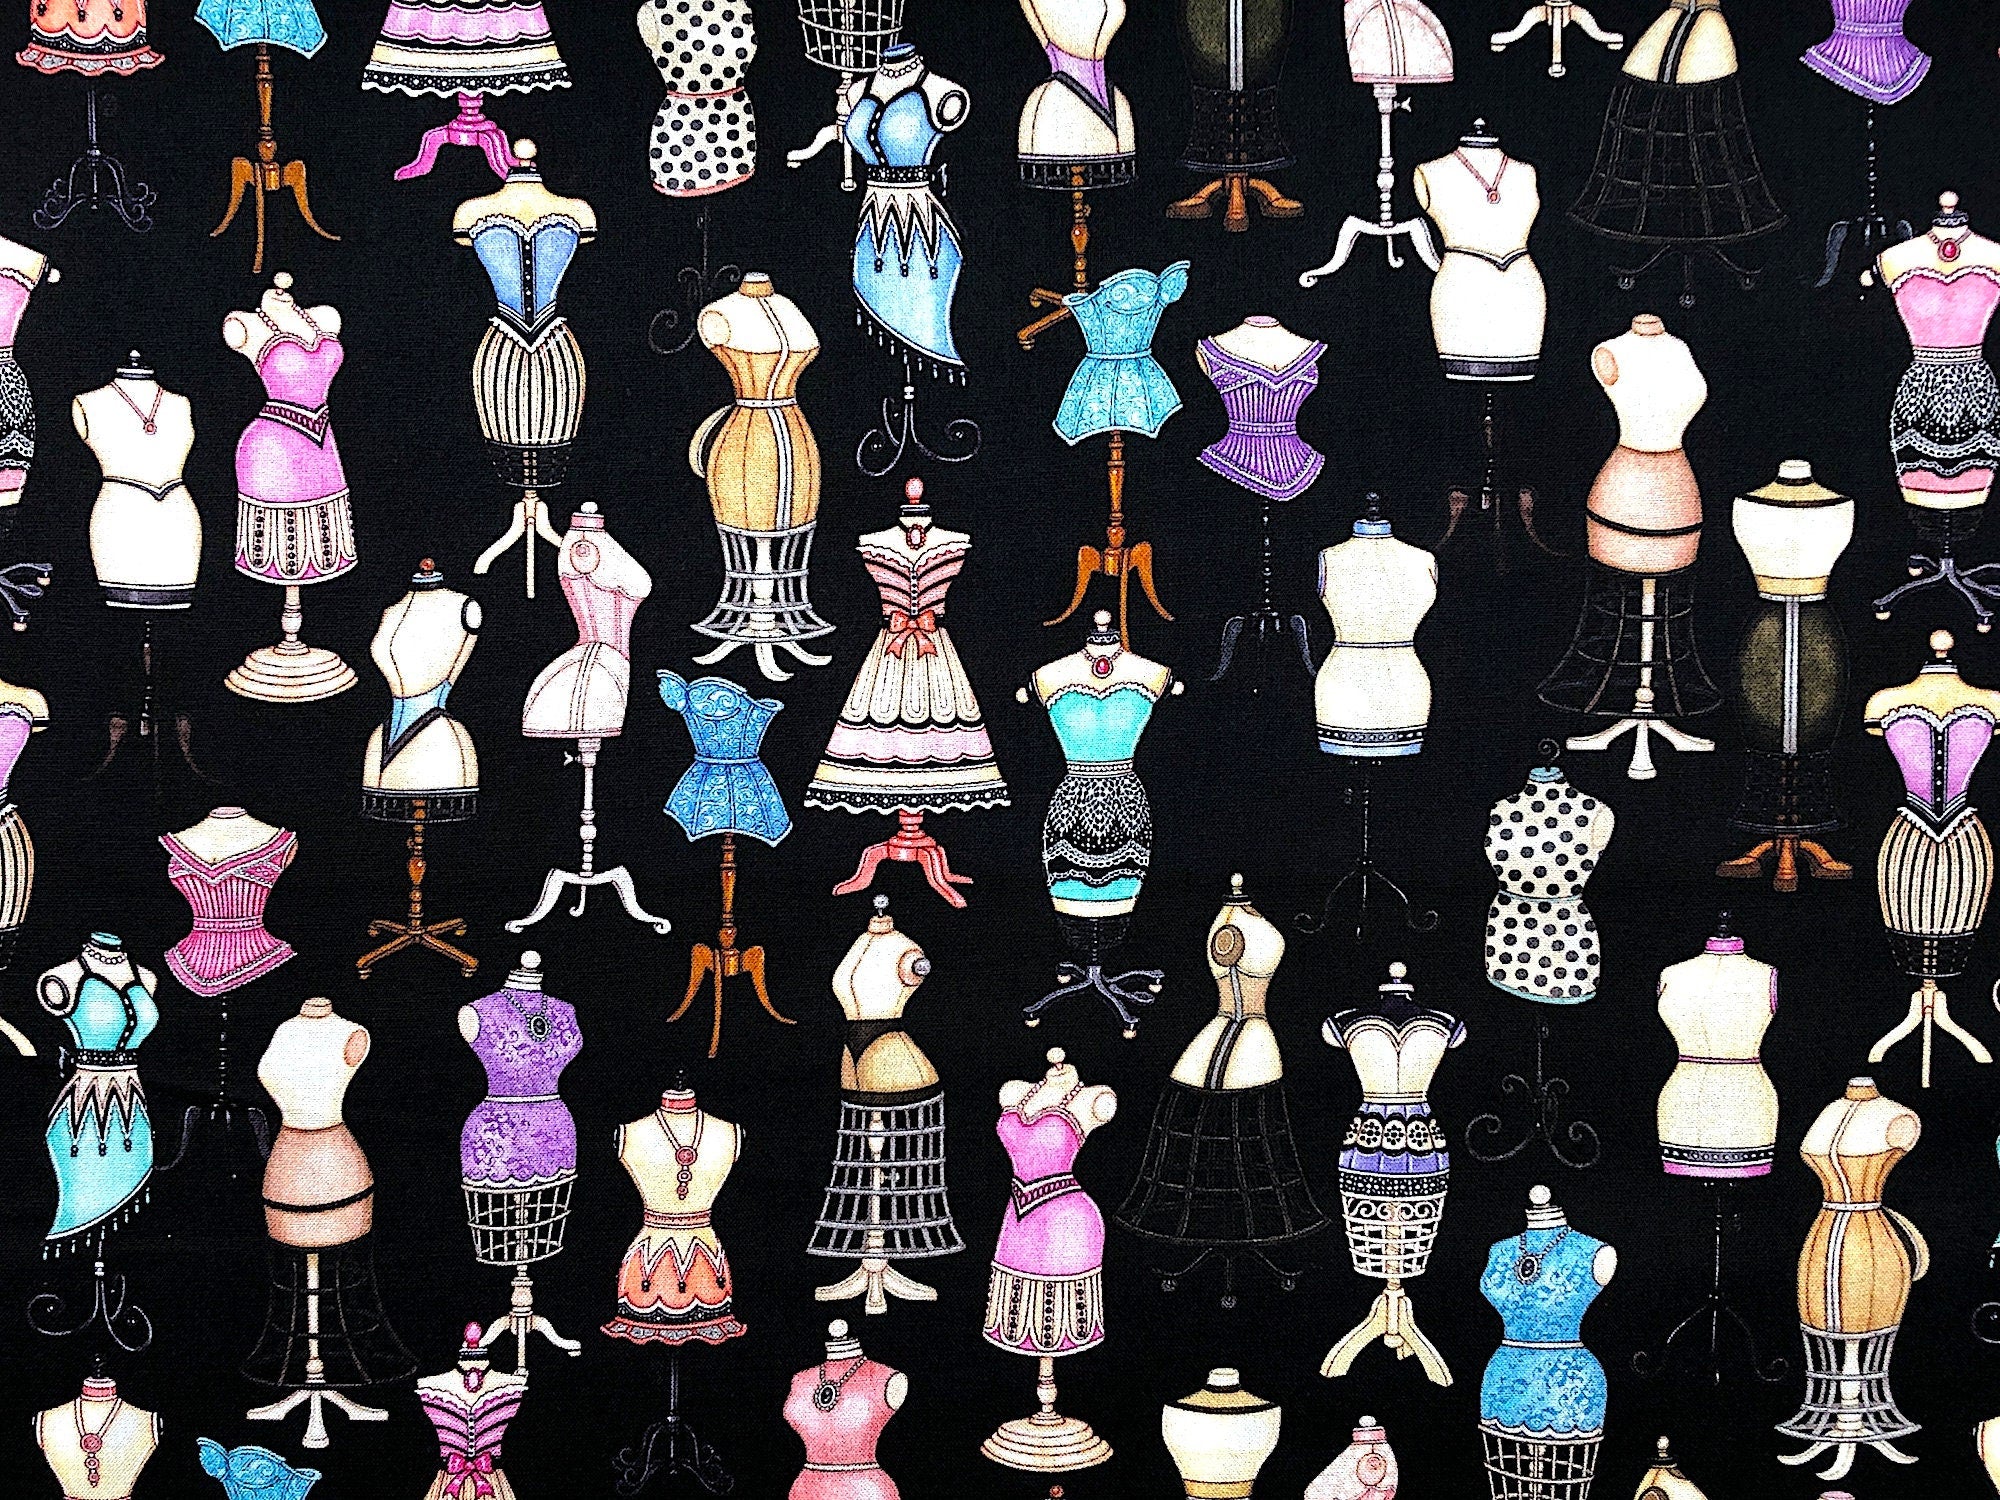 This fabric is part of the Tailor Made collection. This black cotton fabric is covered with dress forms. The dress forms have various styles of dresses on them that are pink, green, blue and lavender.